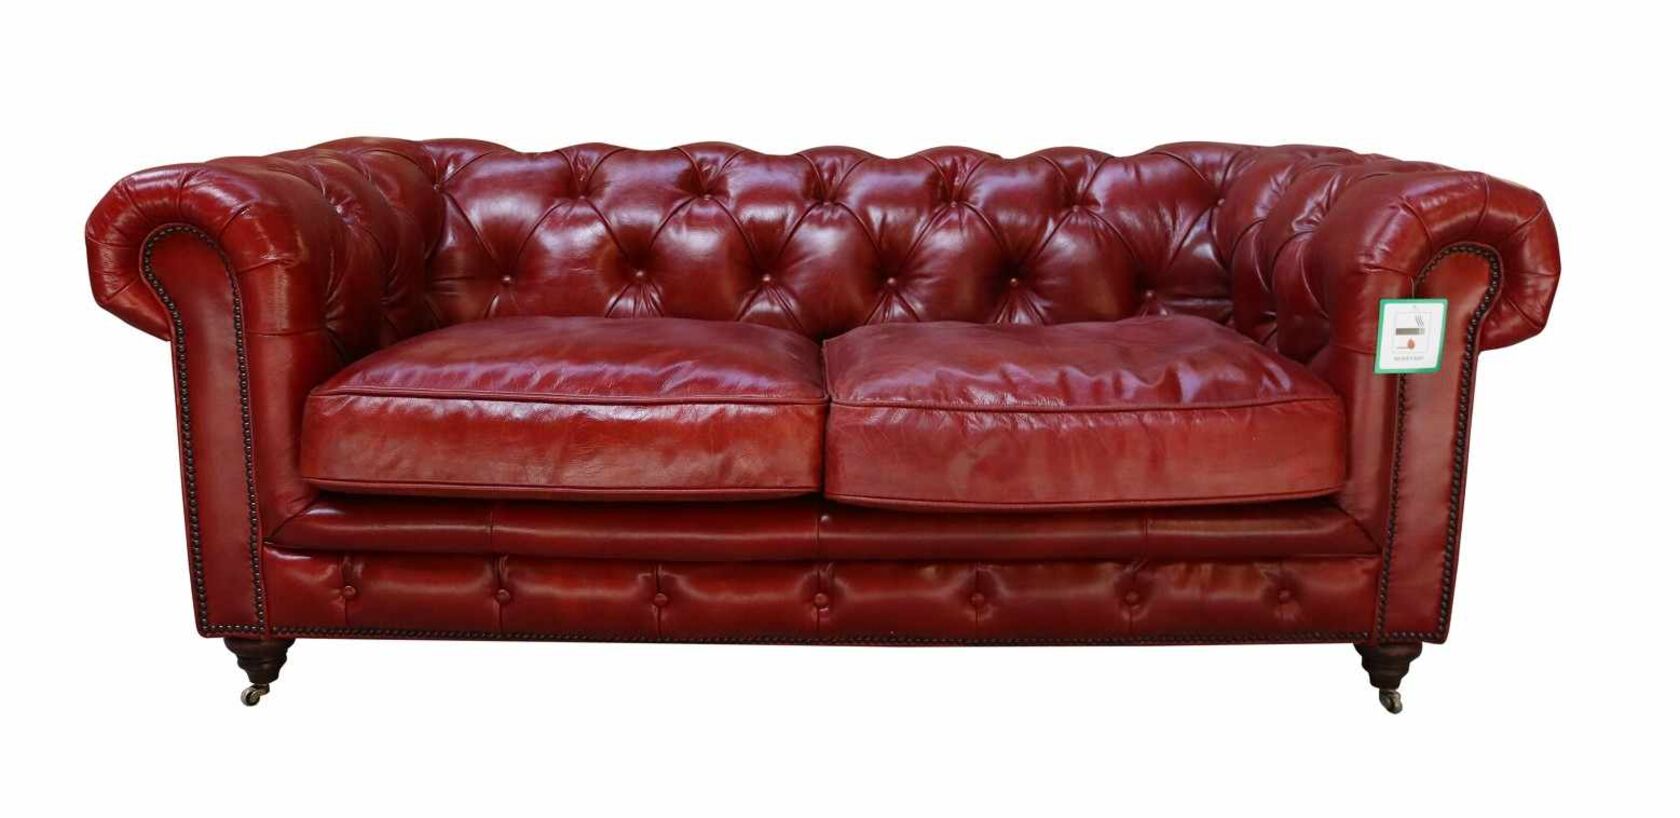 Vintage Distressed Chesterfield 2, Red Leather Tufted Sofa